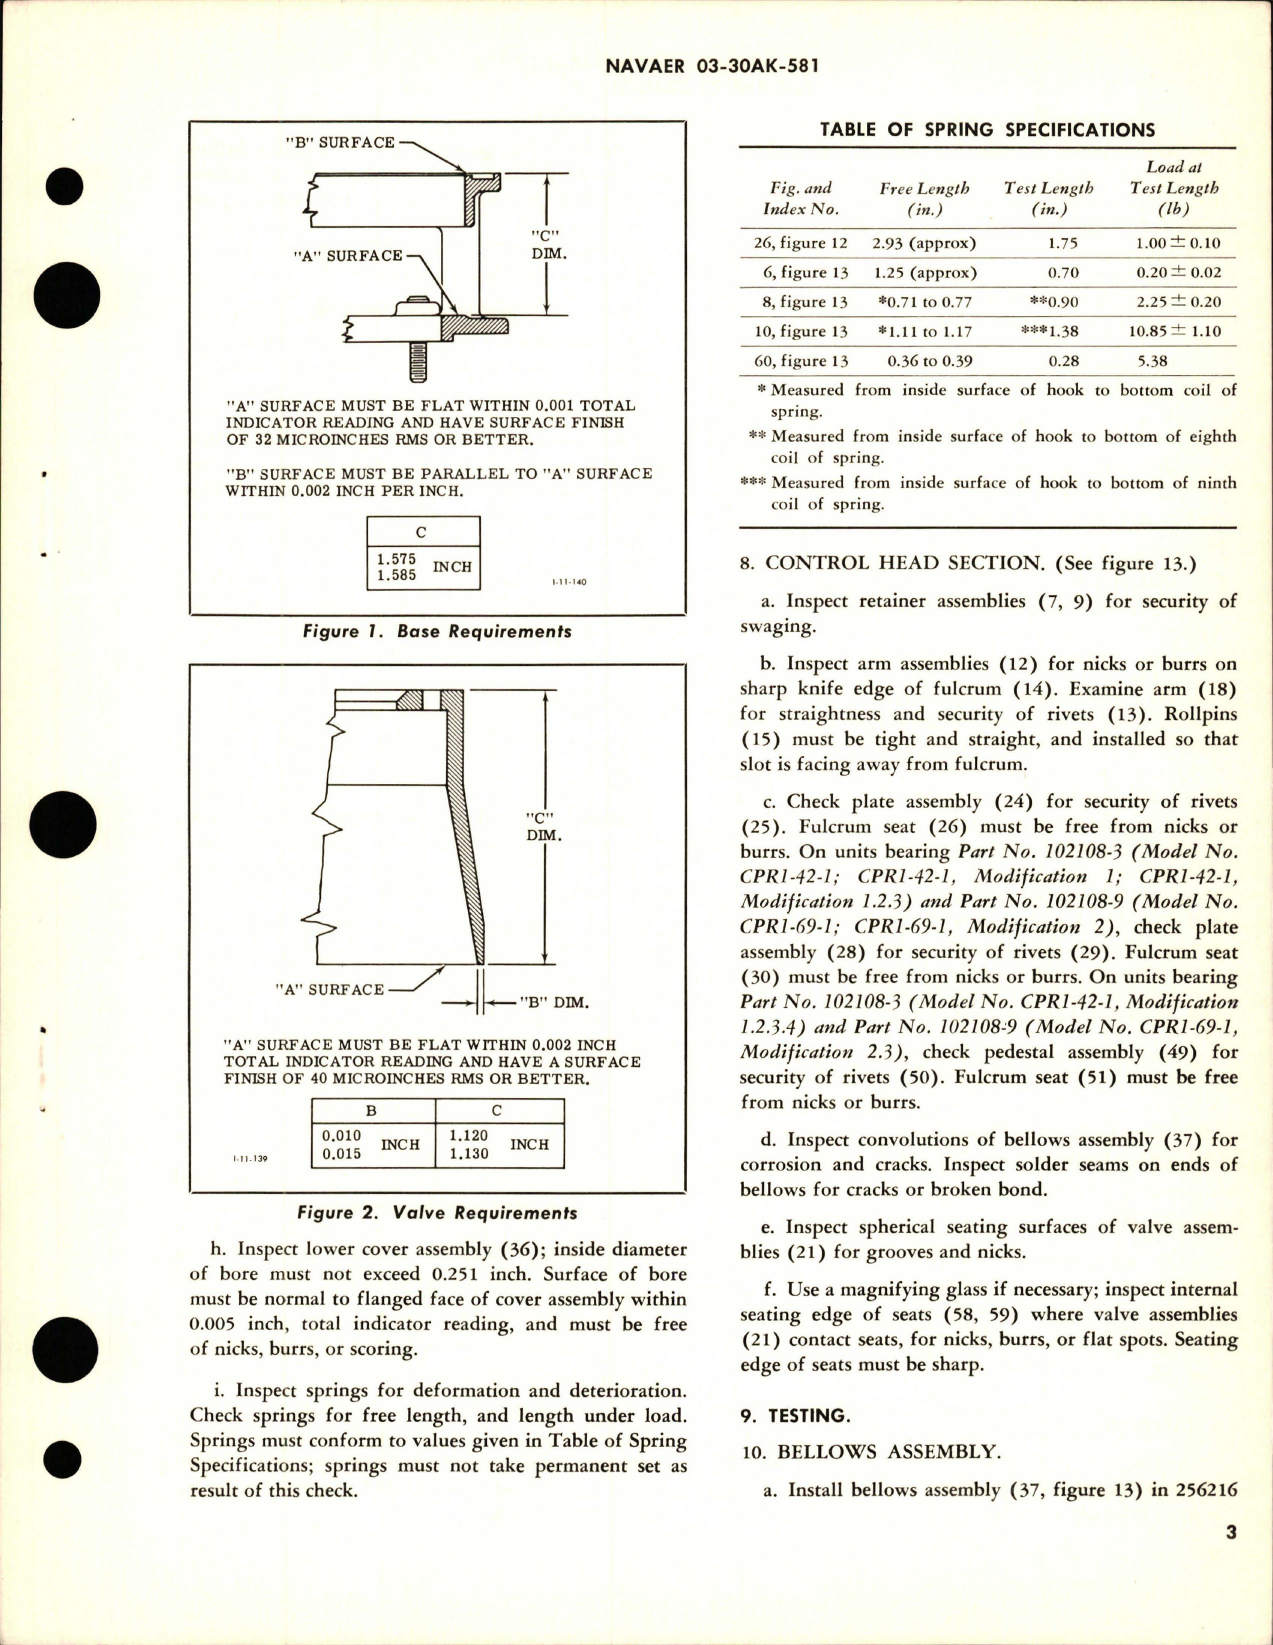 Sample page 5 from AirCorps Library document: Overhaul Instructions with Parts Breakdown for Cabin Air Pressure Regulators - Parts 102108-3 and 102108-9